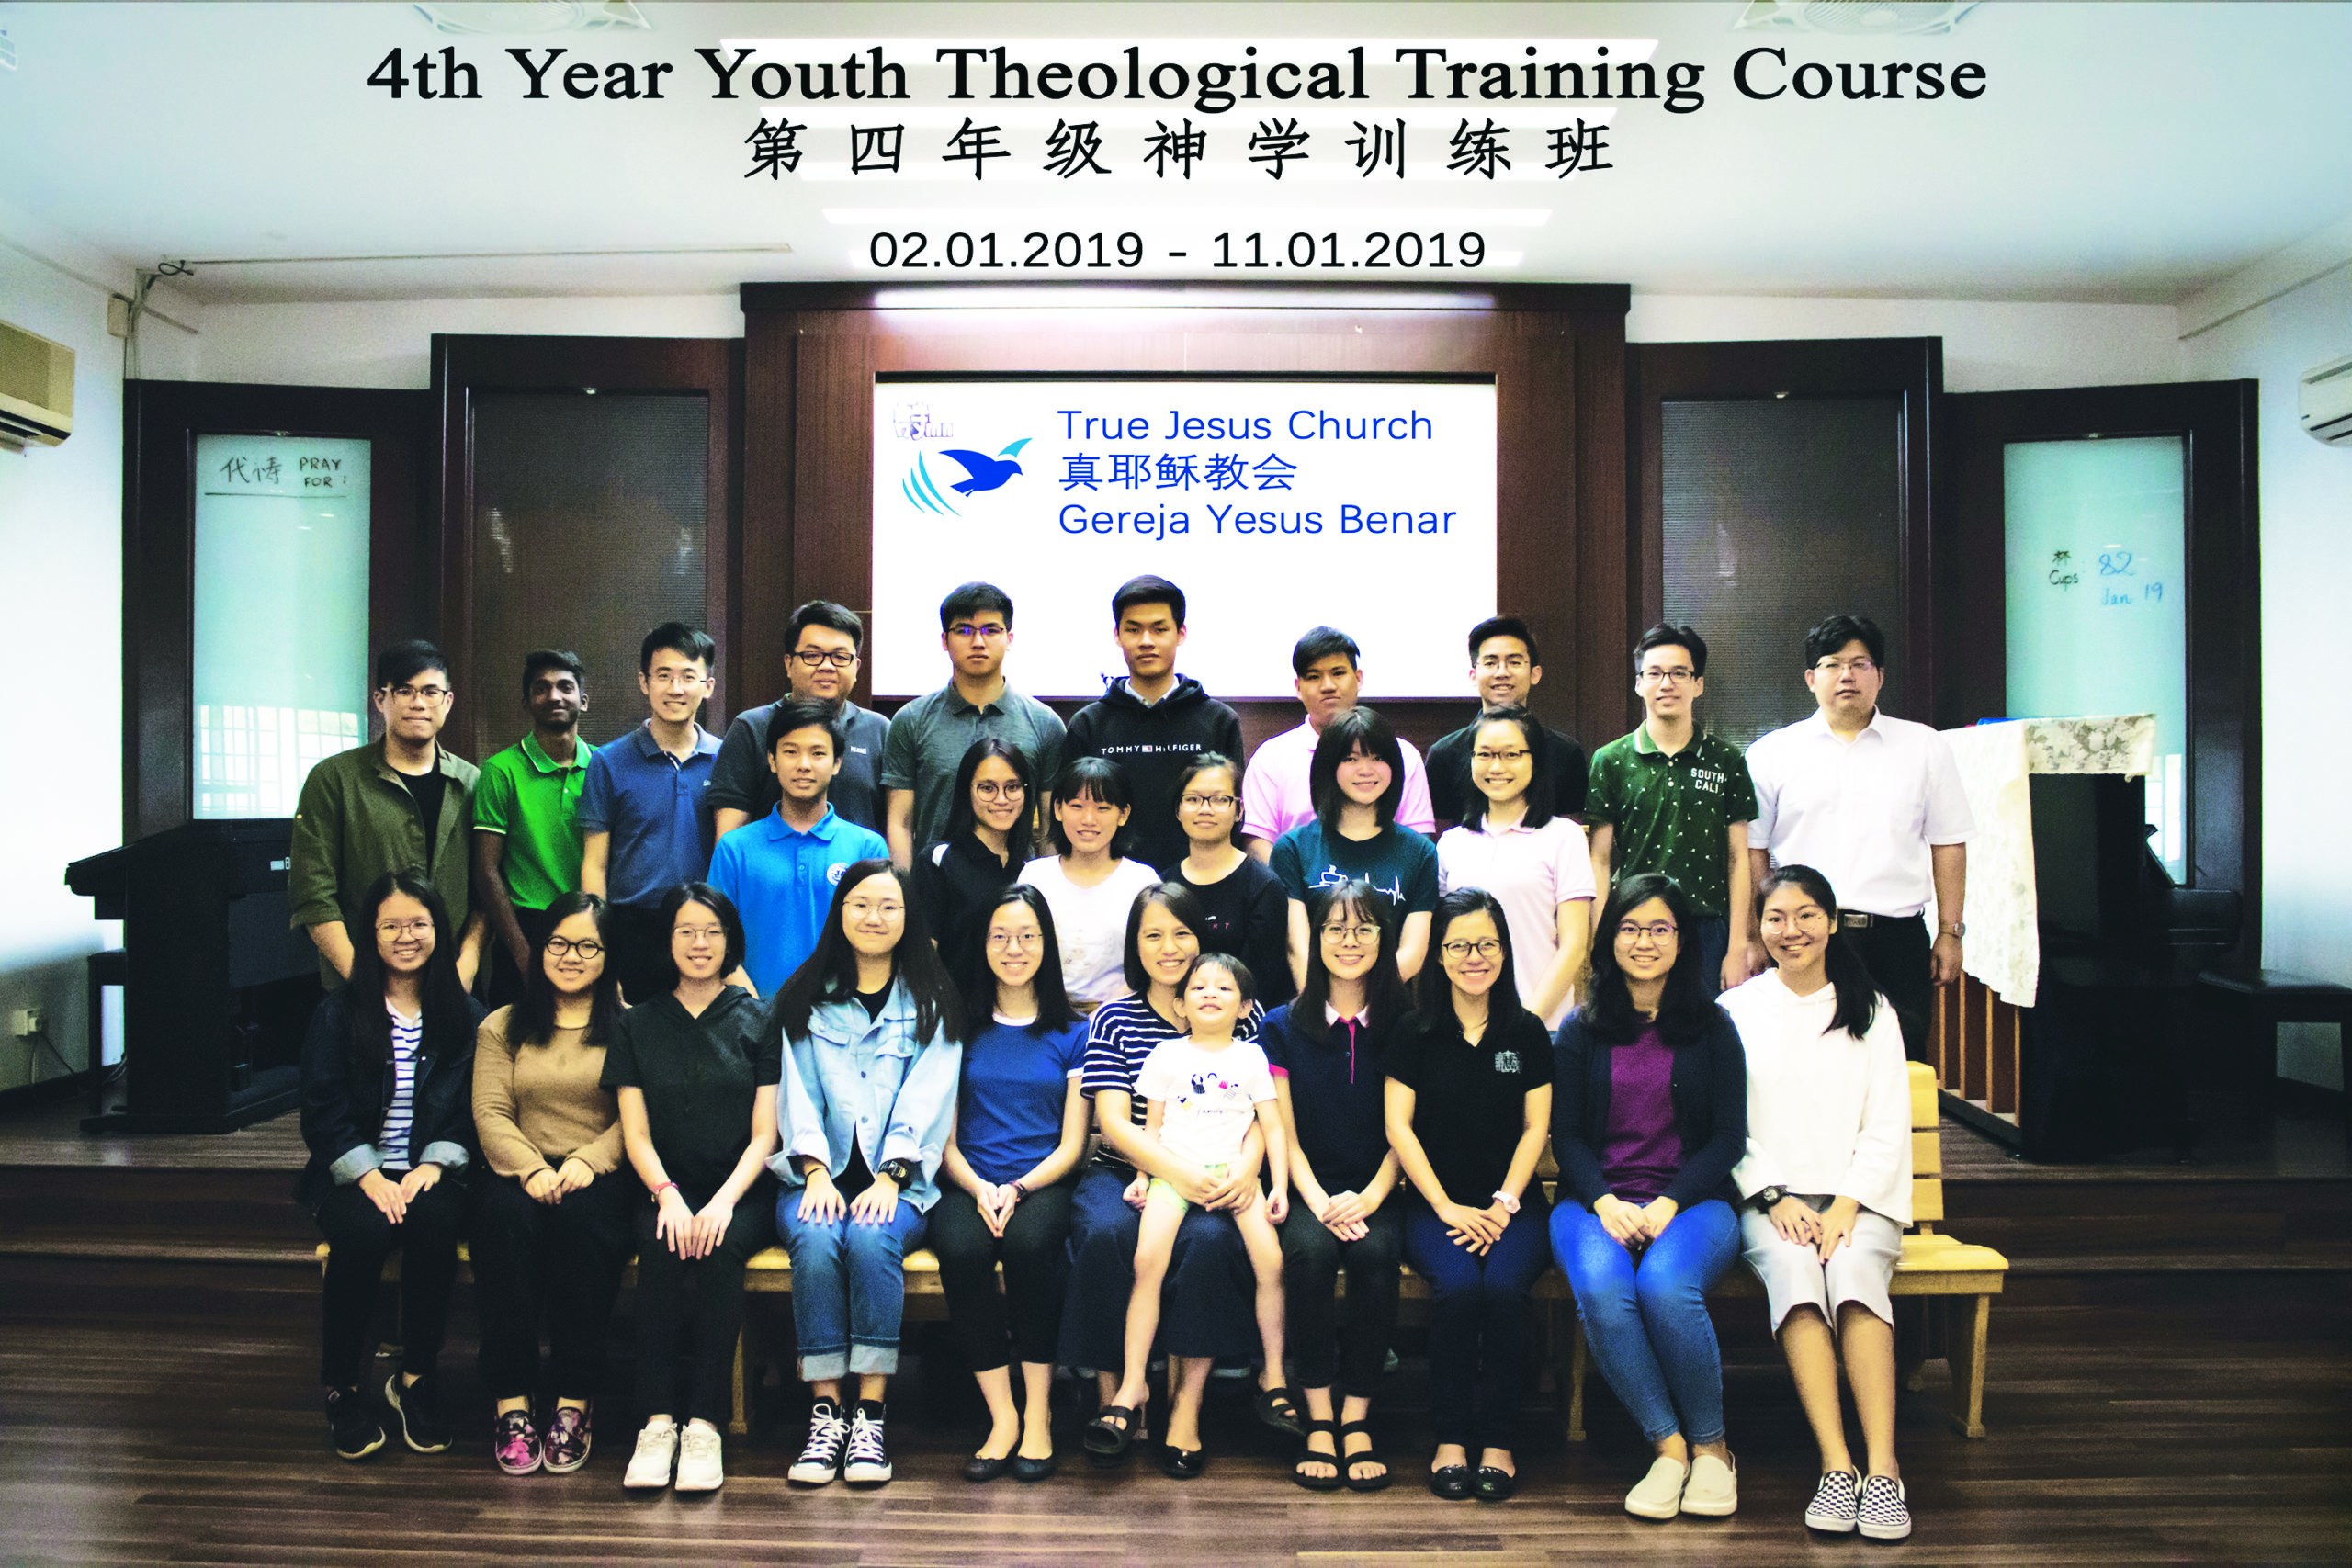 4th Year Youth Theological Training Course 第四年级神学训练班 2019 (1)